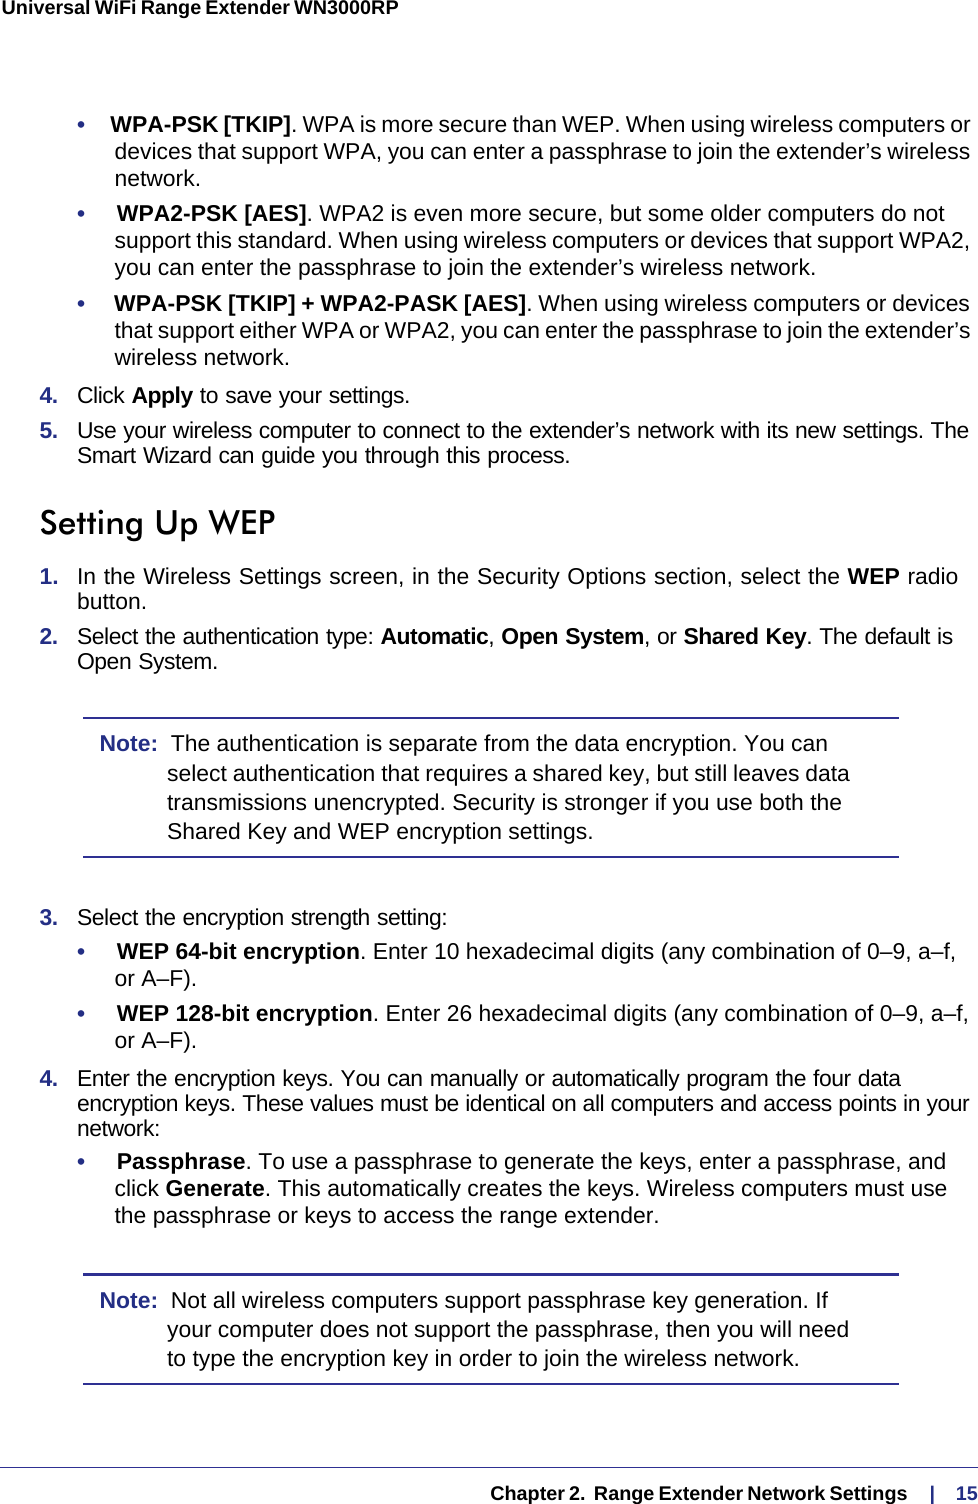   Chapter 2.  Range Extender Network Settings     |    15Universal WiFi Range Extender WN3000RP •     WPA-PSK [TKIP]. WPA is more secure than WEP. When using wireless computers or devices that support WPA, you can enter a passphrase to join the extender’s wireless network.•     WPA2-PSK [AES]. WPA2 is even more secure, but some older computers do not support this standard. When using wireless computers or devices that support WPA2, you can enter the passphrase to join the extender’s wireless network.•     WPA-PSK [TKIP] + WPA2-PASK [AES]. When using wireless computers or devices that support either WPA or WPA2, you can enter the passphrase to join the extender’s wireless network.4.  Click Apply to save your settings.5.  Use your wireless computer to connect to the extender’s network with its new settings. The Smart Wizard can guide you through this process. Setting Up WEP1.  In the Wireless Settings screen, in the Security Options section, select the WEP radio button.2.  Select the authentication type: Automatic, Open System, or Shared Key. The default is Open System.Note:  The authentication is separate from the data encryption. You can select authentication that requires a shared key, but still leaves data transmissions unencrypted. Security is stronger if you use both the Shared Key and WEP encryption settings.3.  Select the encryption strength setting:•     WEP 64-bit encryption. Enter 10 hexadecimal digits (any combination of 0–9, a–f,  or A–F).•     WEP 128-bit encryption. Enter 26 hexadecimal digits (any combination of 0–9, a–f, or A–F).4.  Enter the encryption keys. You can manually or automatically program the four data encryption keys. These values must be identical on all computers and access points in your network:•     Passphrase. To use a passphrase to generate the keys, enter a passphrase, and click Generate. This automatically creates the keys. Wireless computers must use the passphrase or keys to access the range extender. Note:  Not all wireless computers support passphrase key generation. If your computer does not support the passphrase, then you will need to type the encryption key in order to join the wireless network. 